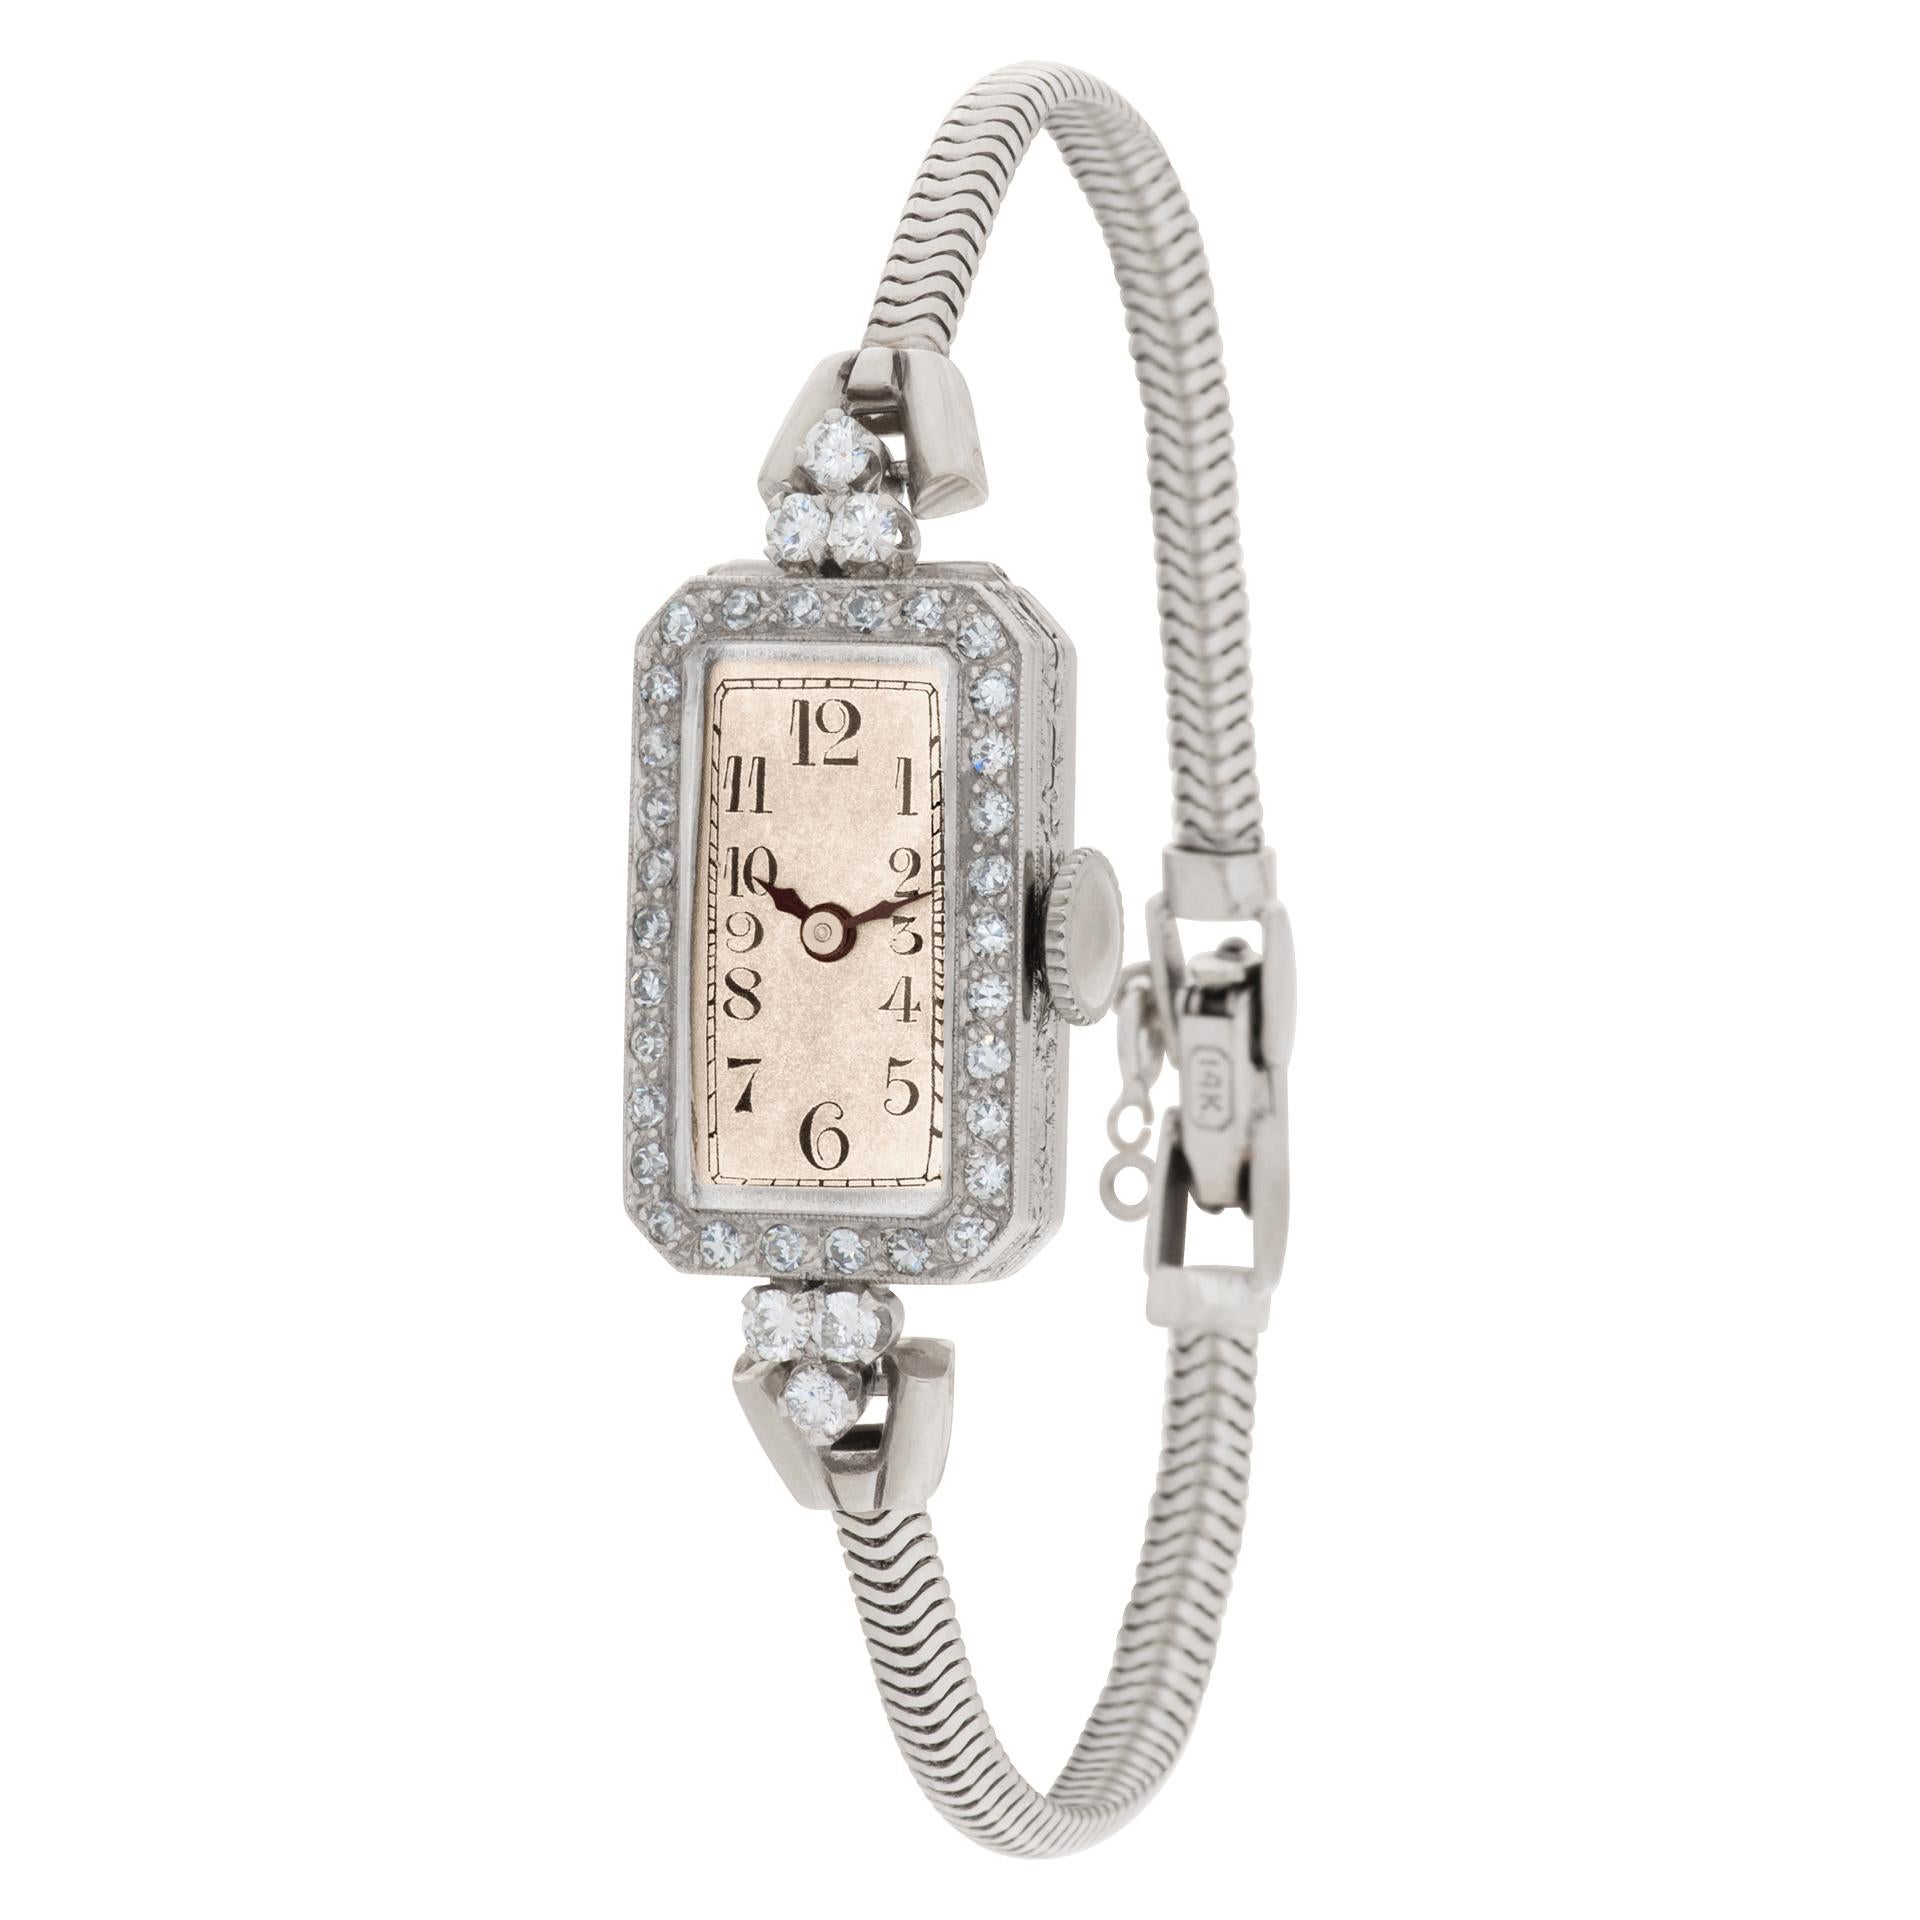 Vintage platinum diamond cocktail watch on a 14k white gold band. Length: 6 inches.
